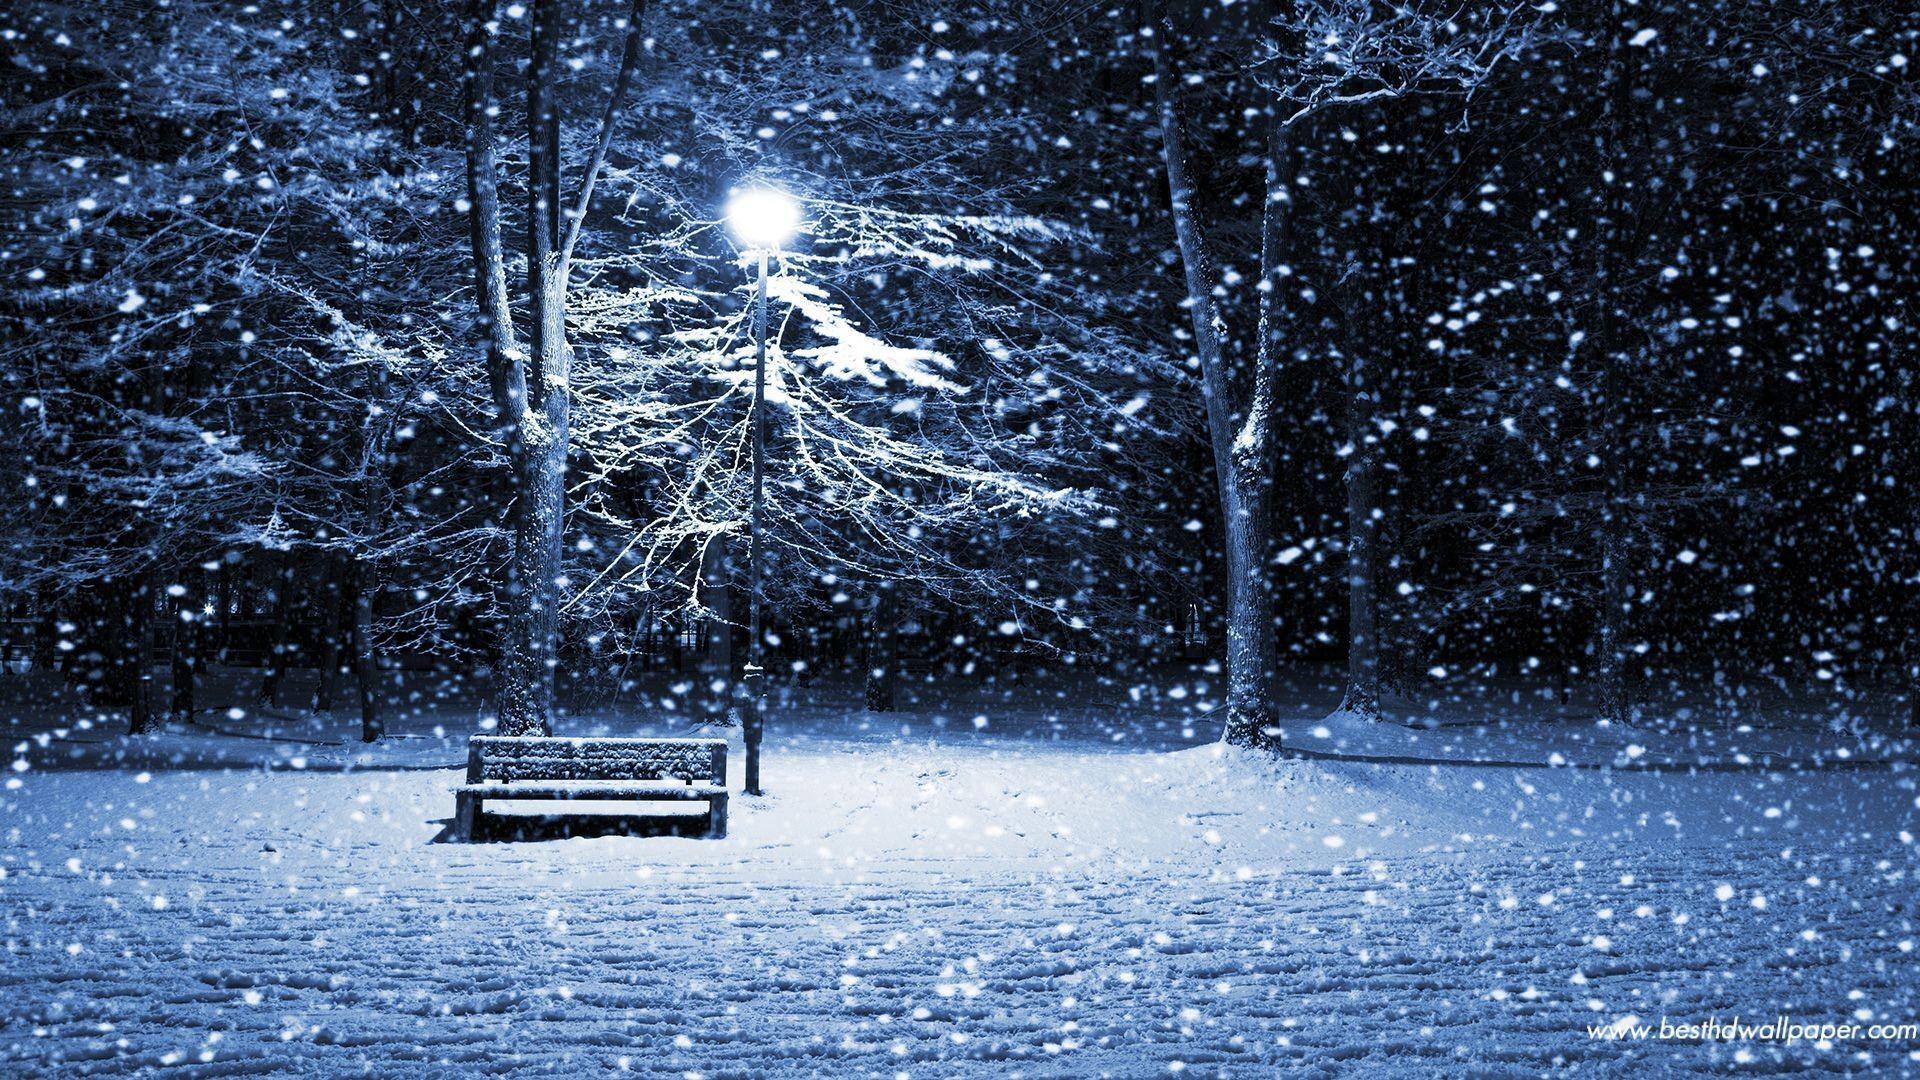 christmas-snow-scene-wallpapers-wallpaper-cave